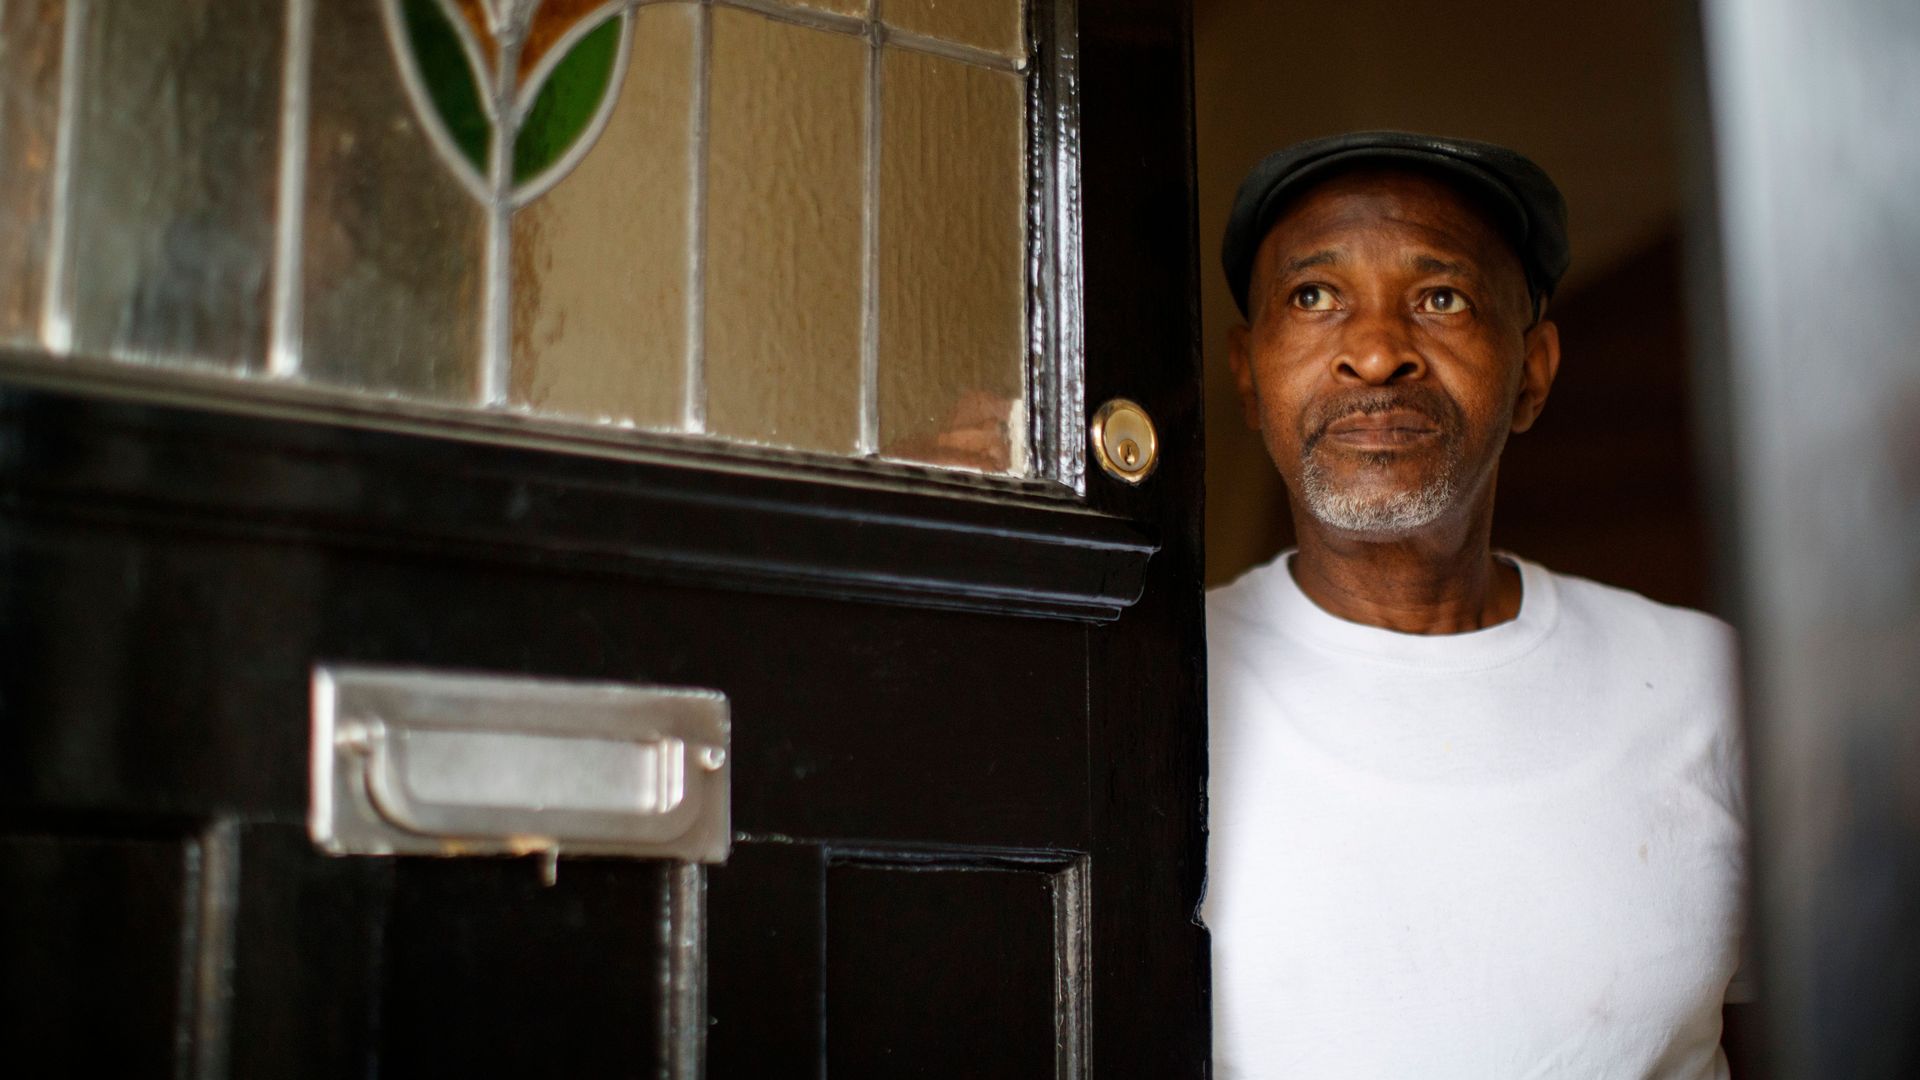 Jamaica-born Anthony, a “Windrush” immigrant, at his home in the UK 